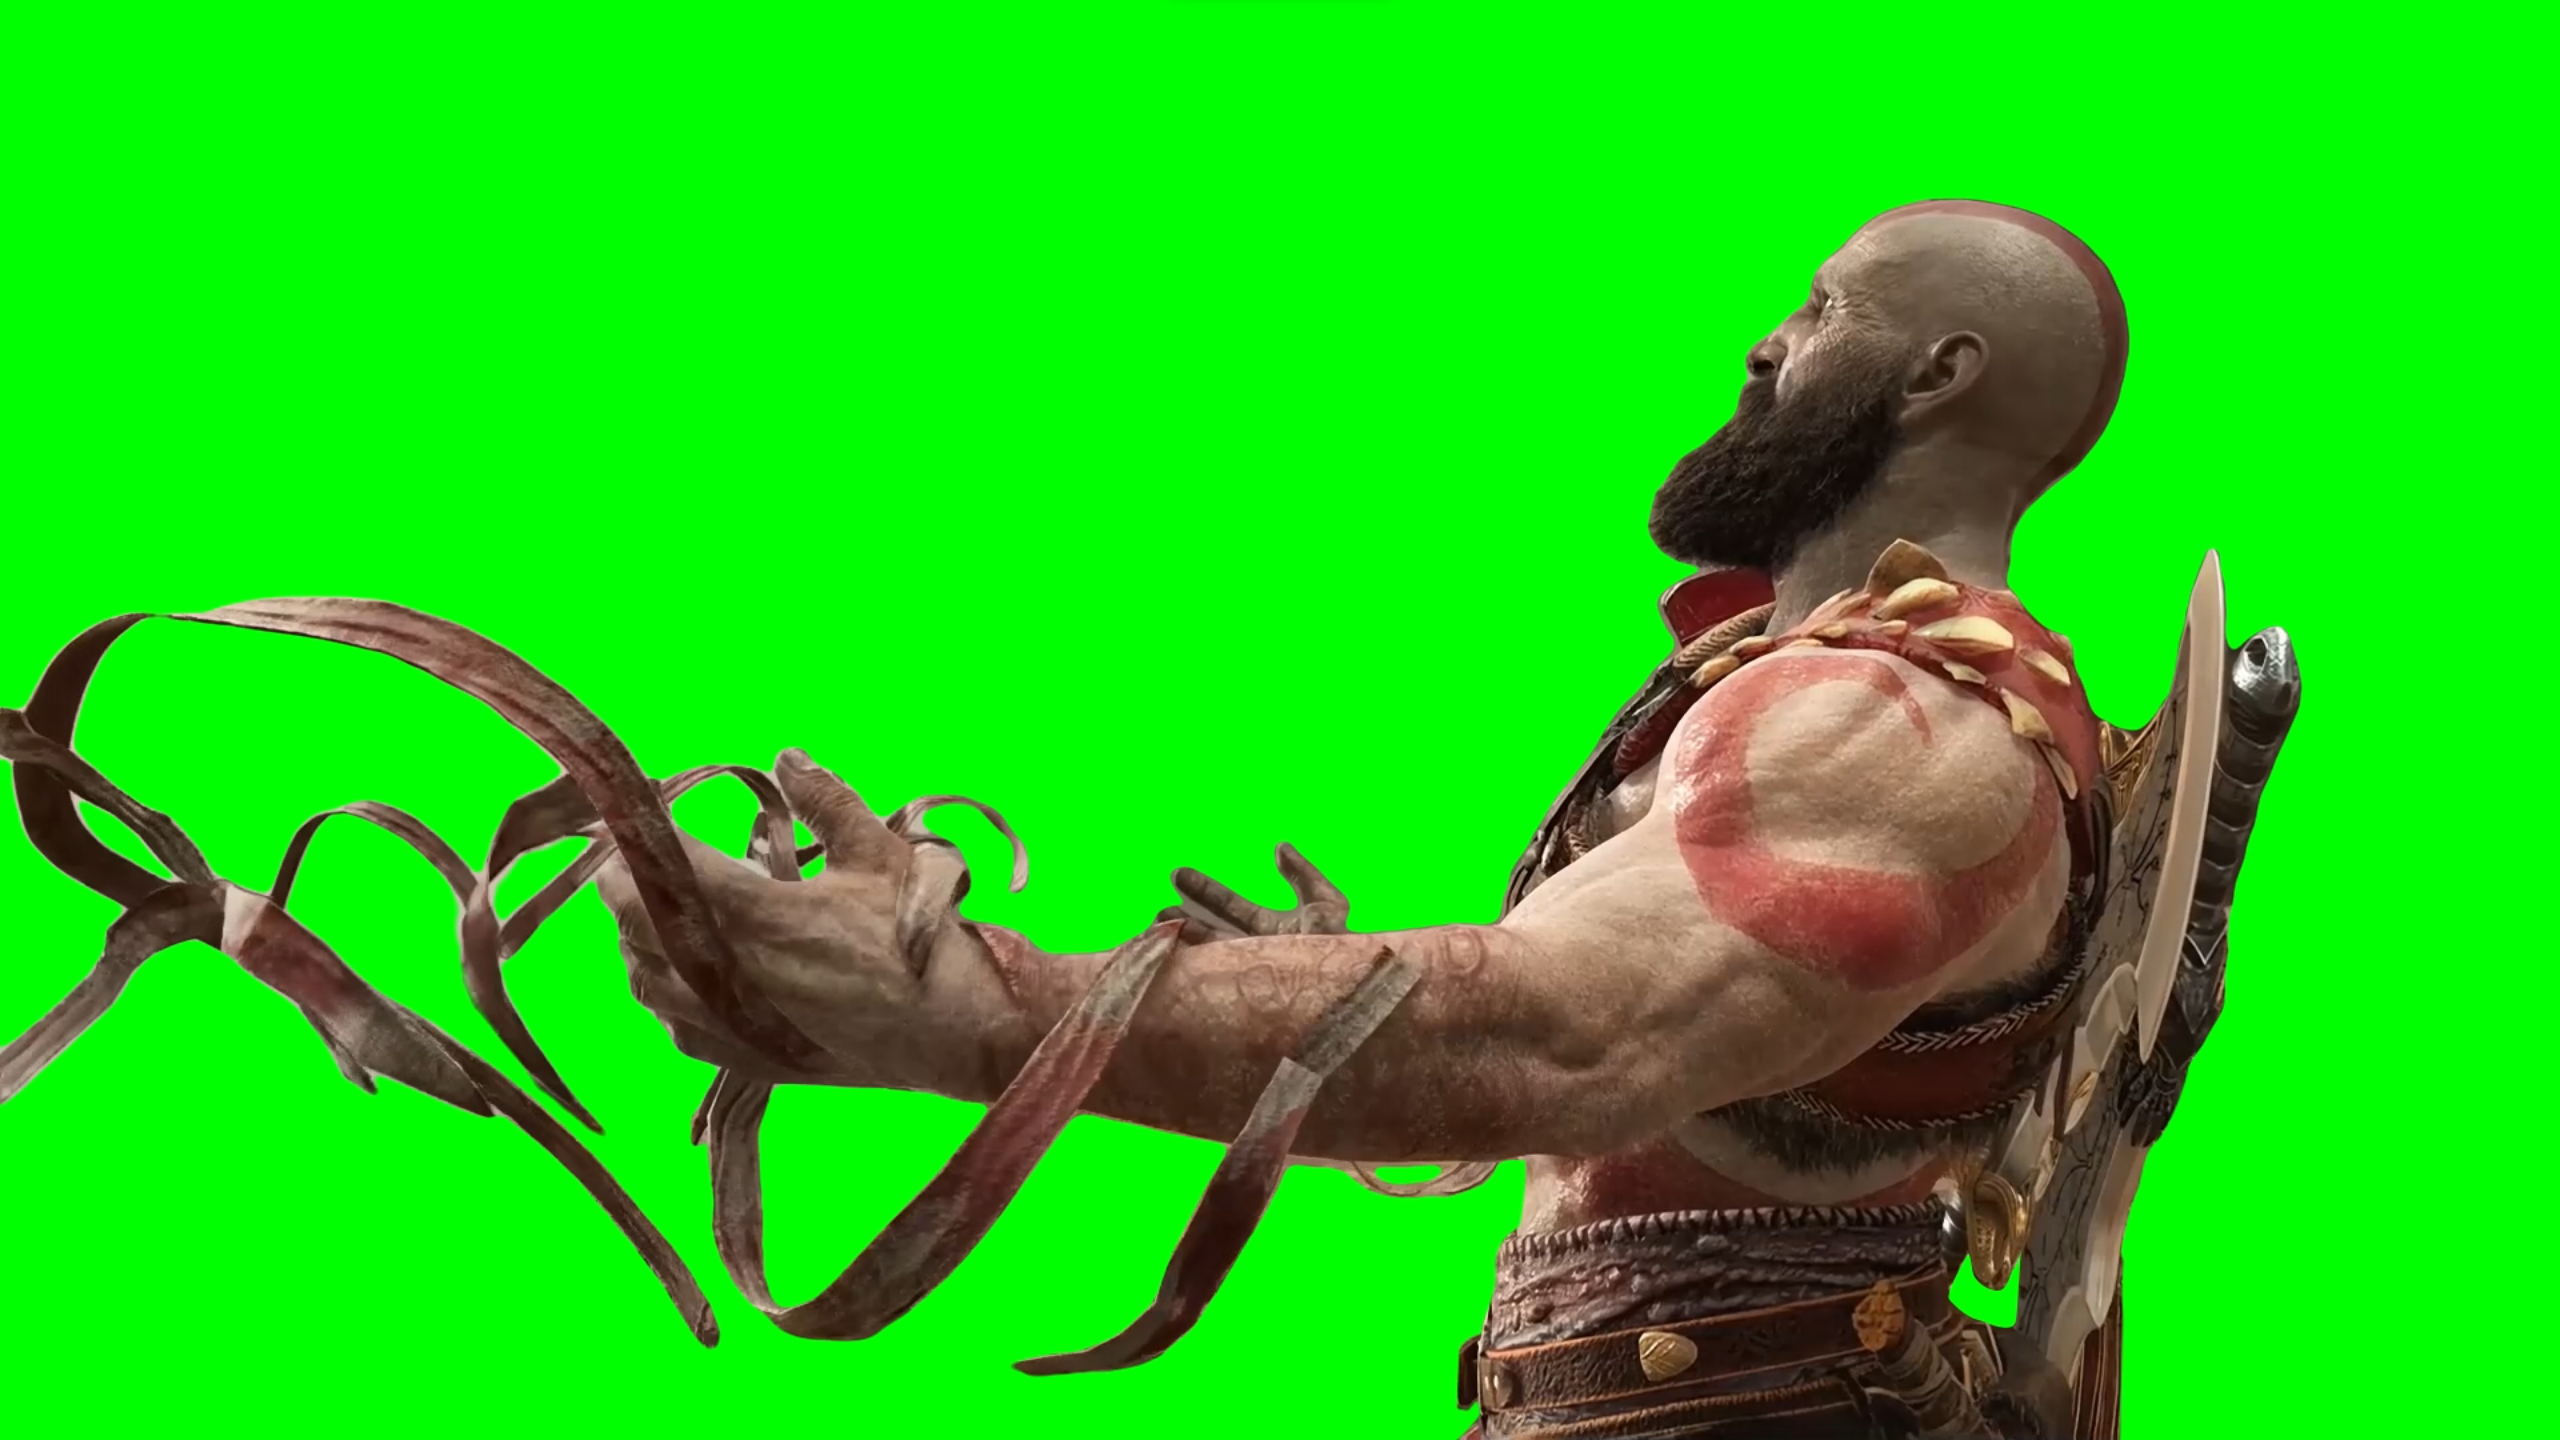 Kratos removing his arm bandages - God of War 2018 (Green Screen)